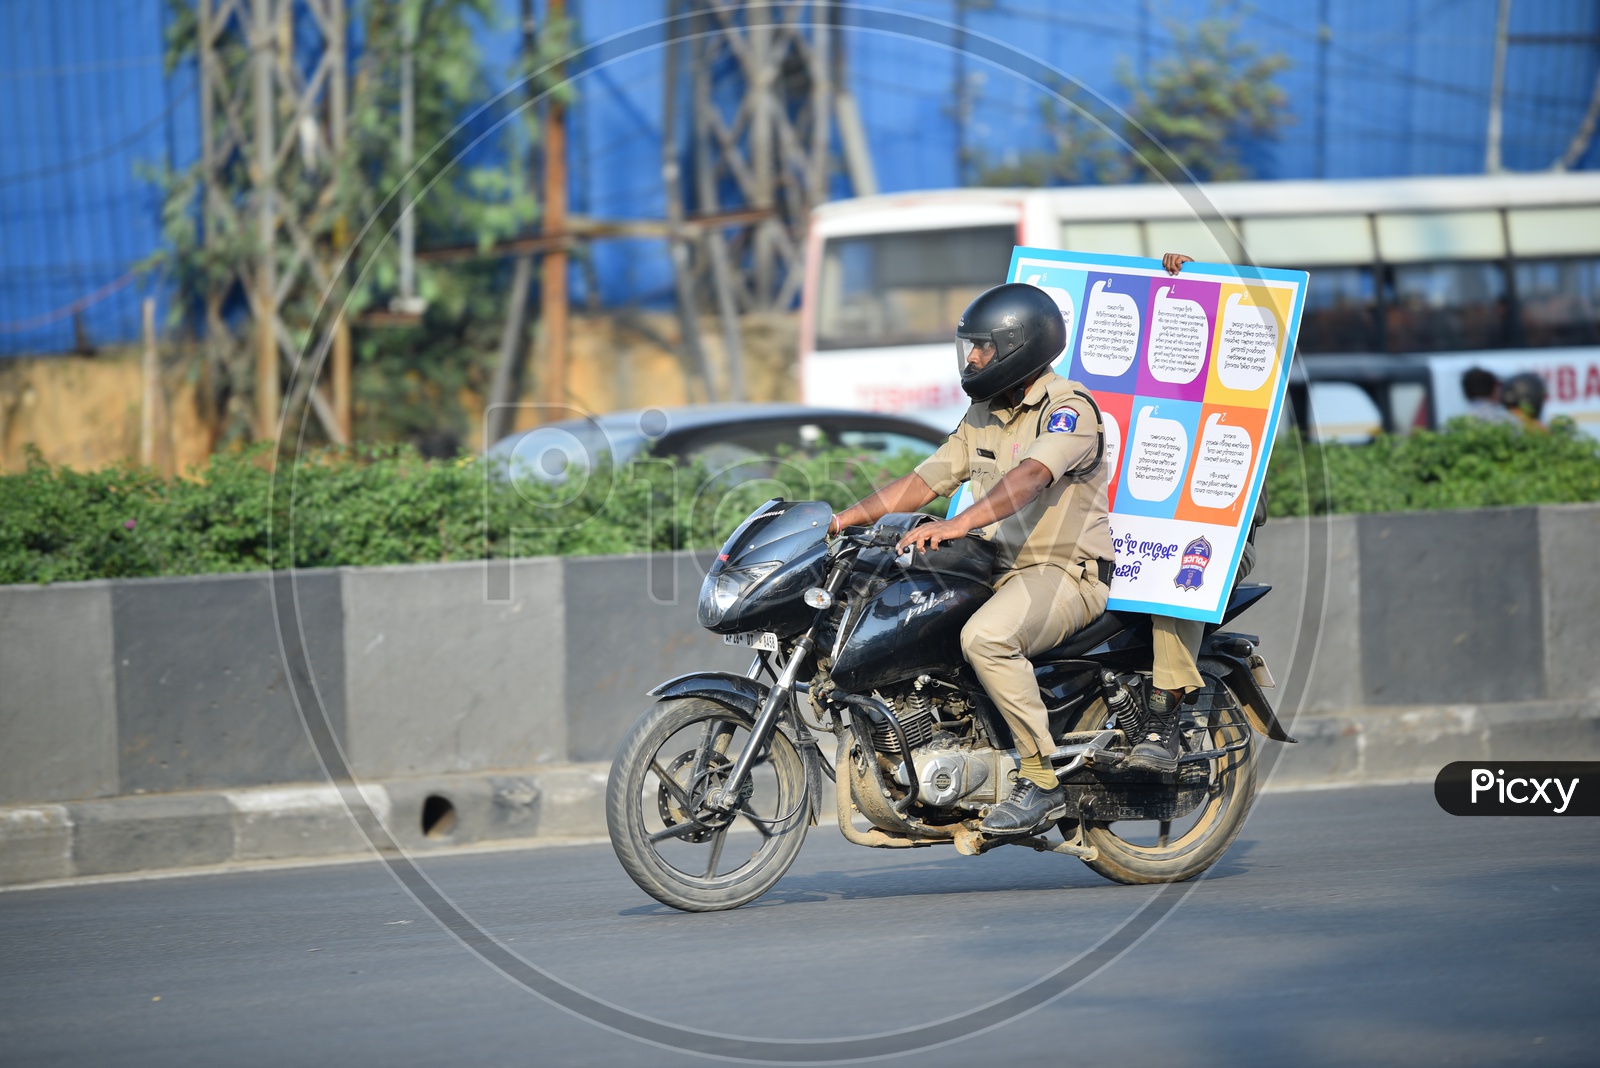 Policeman Riding with a Signage on Bike